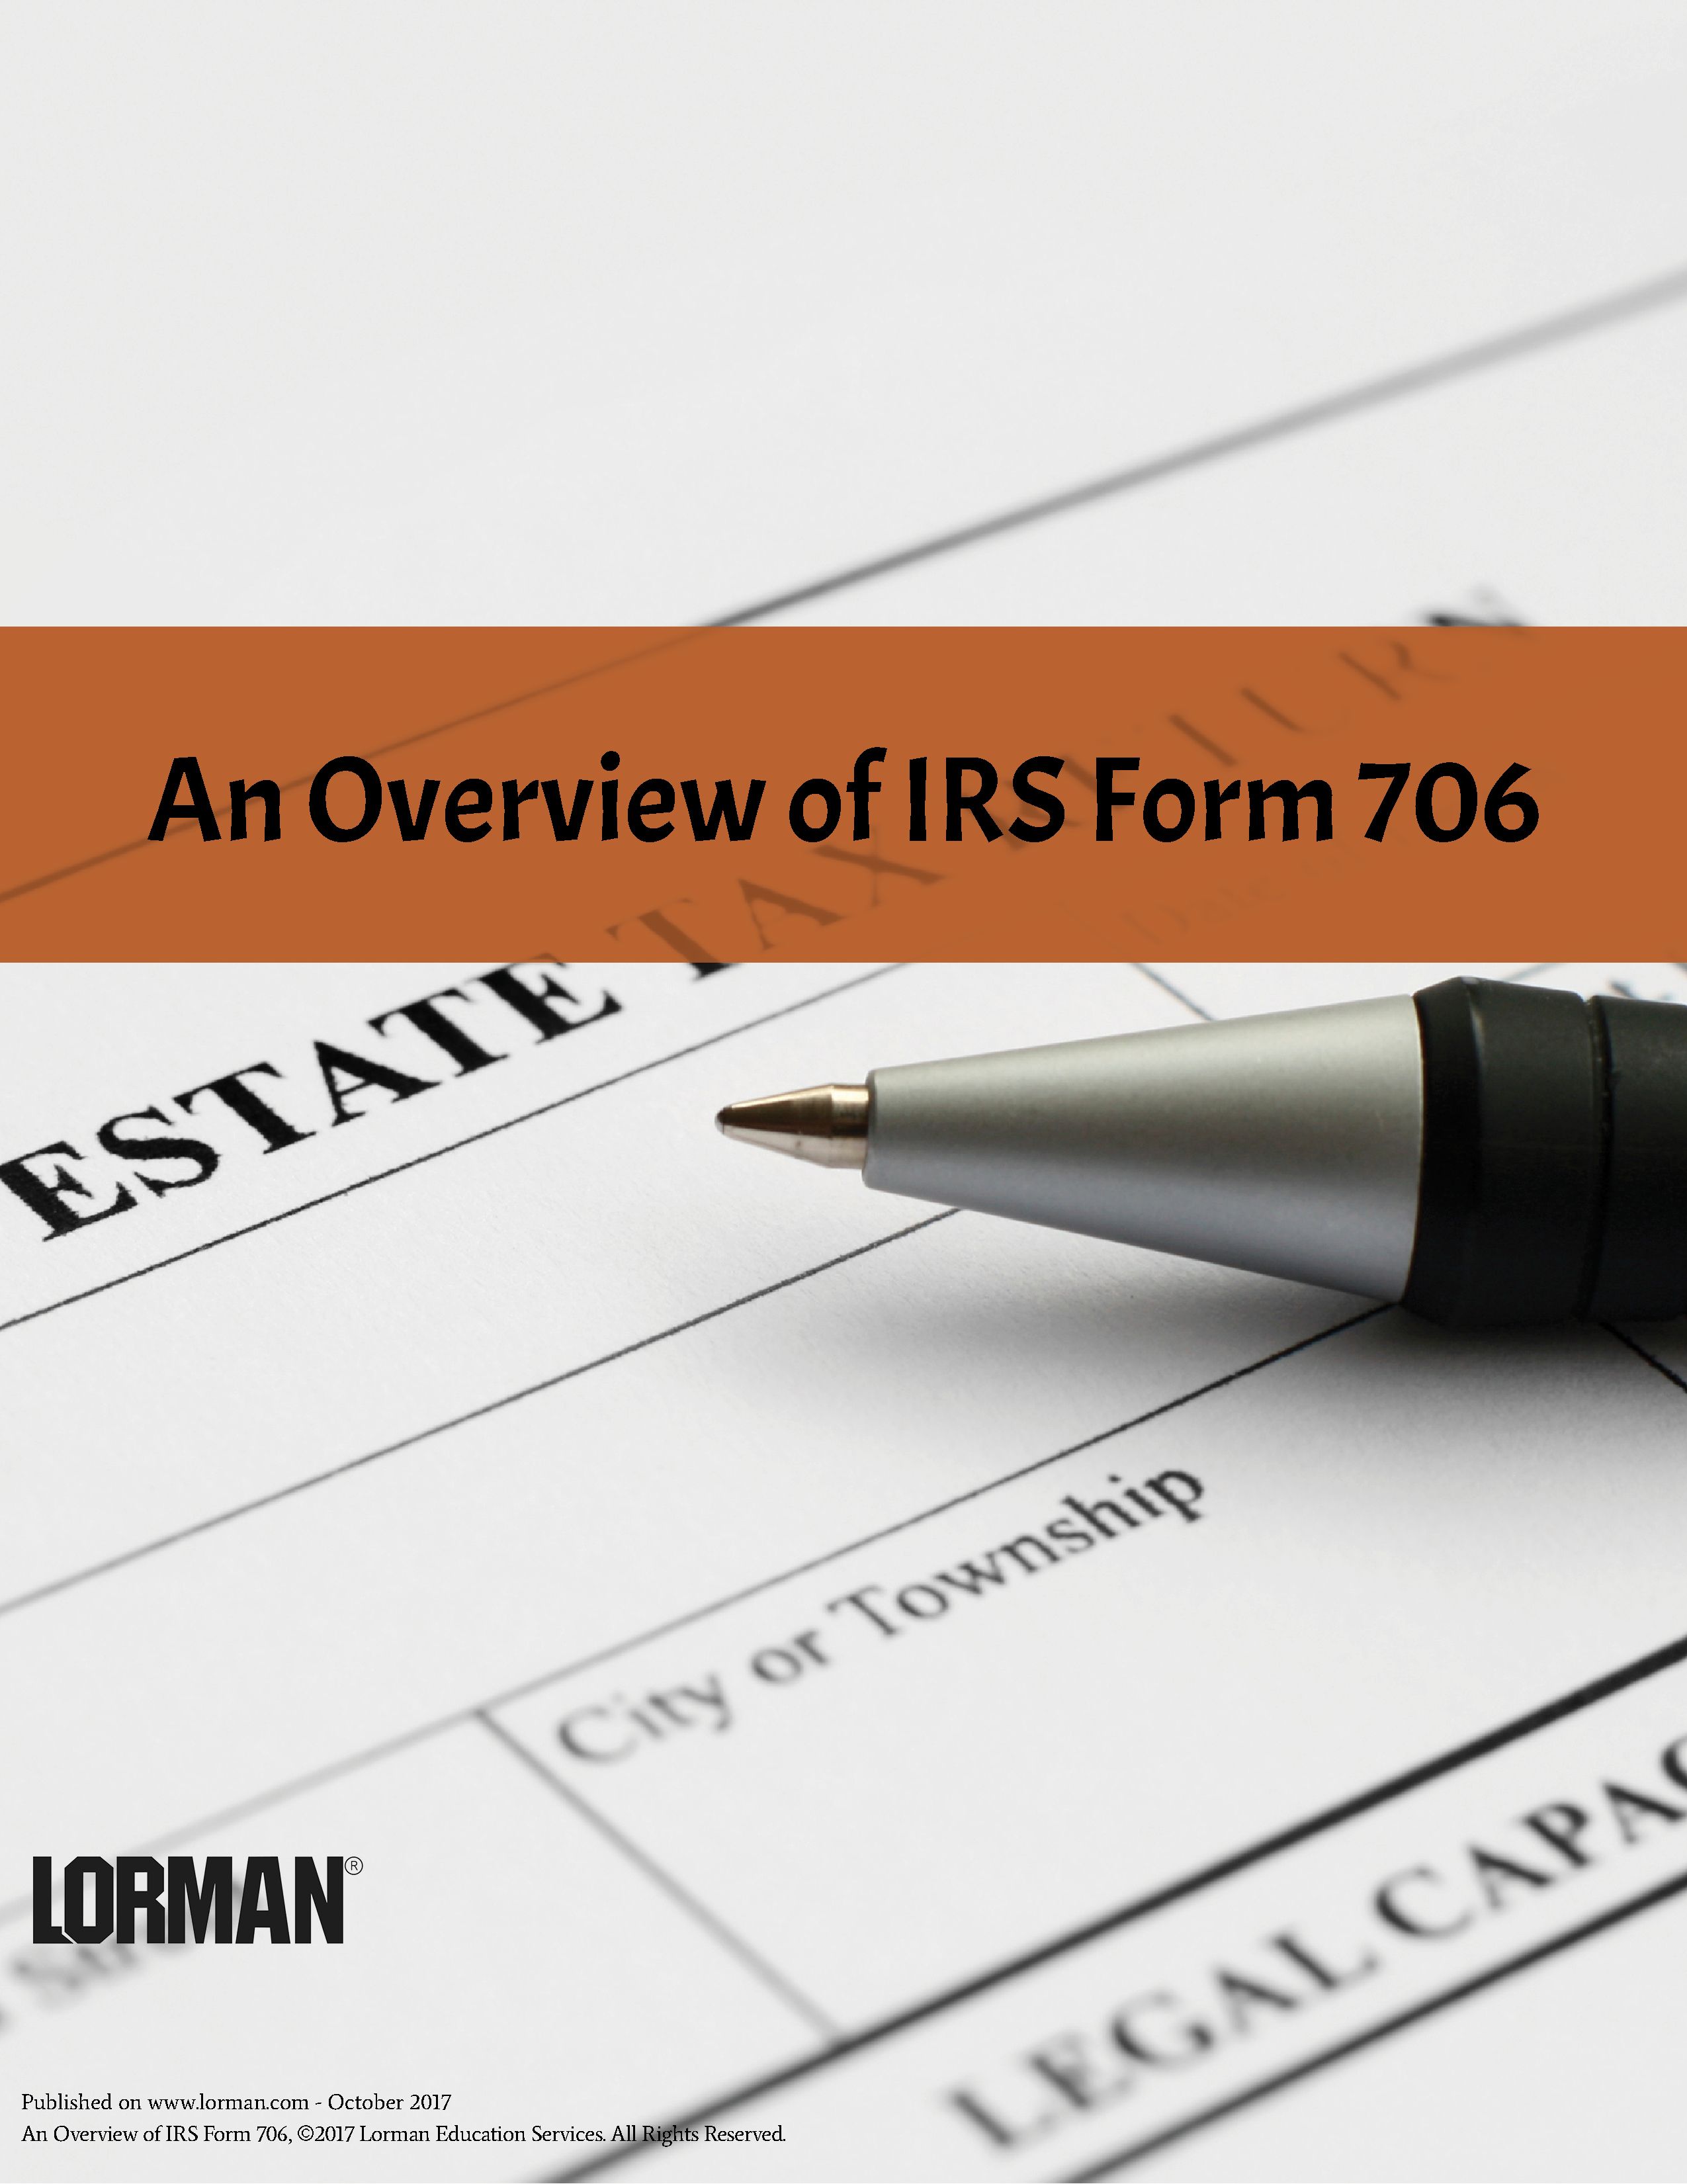 An Overview of IRS Form 706